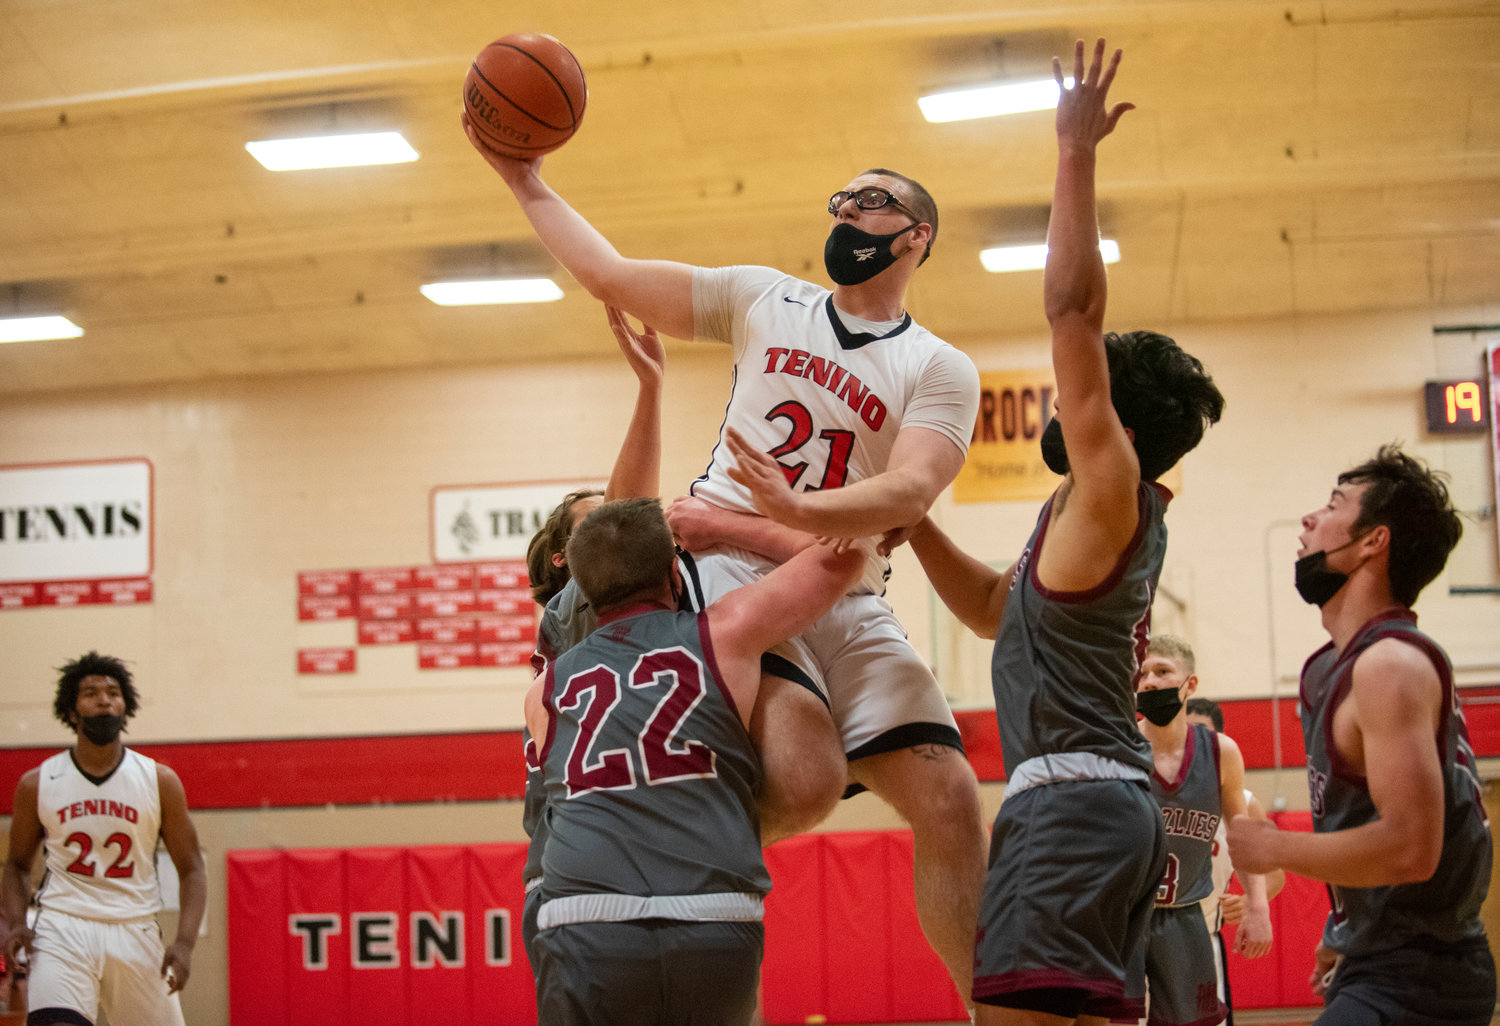 Tenino senior Conleth Jackson soars over a Hoquiam triple team for a layup at home on Wednesday.